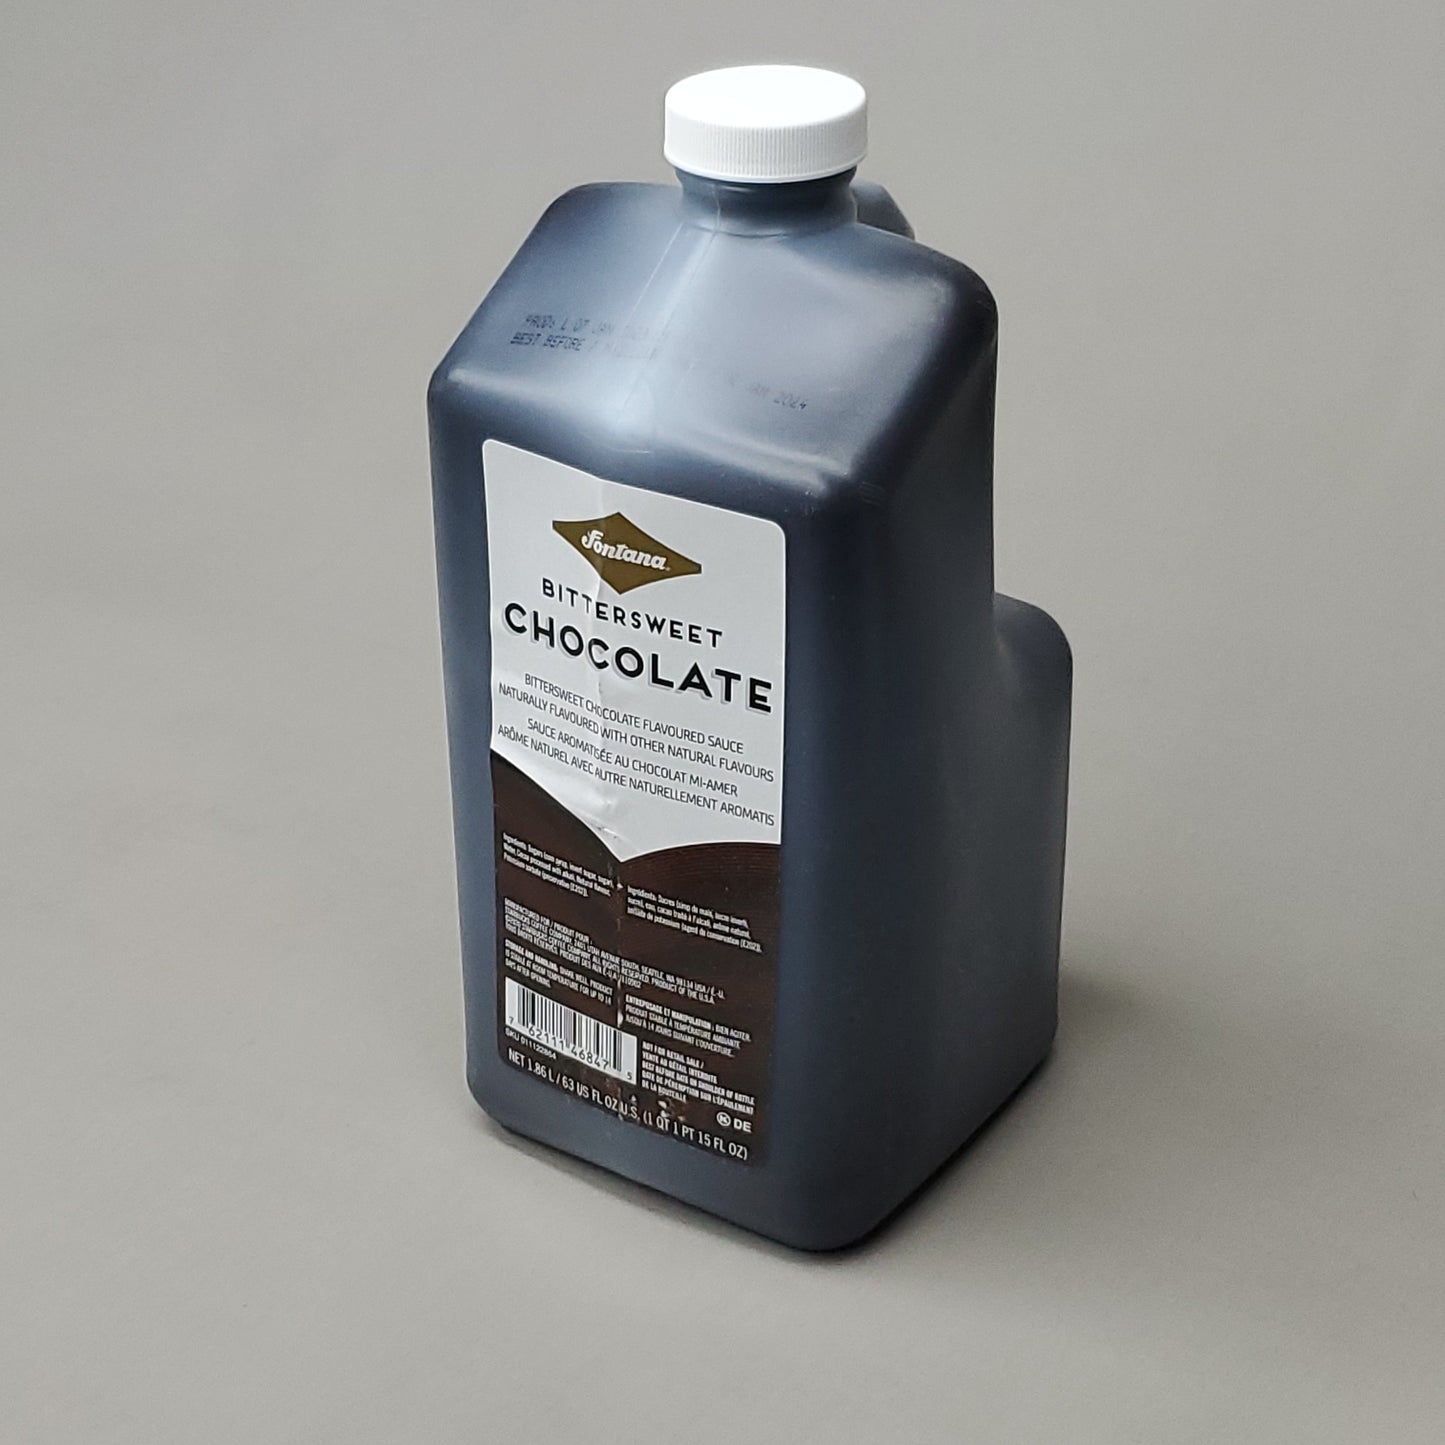 STARBUCKS (4 PACK) Fontana Bittersweet Chocolate Flavored Sauce 1.86 L/bottle BB 05/24 (AS-IS)